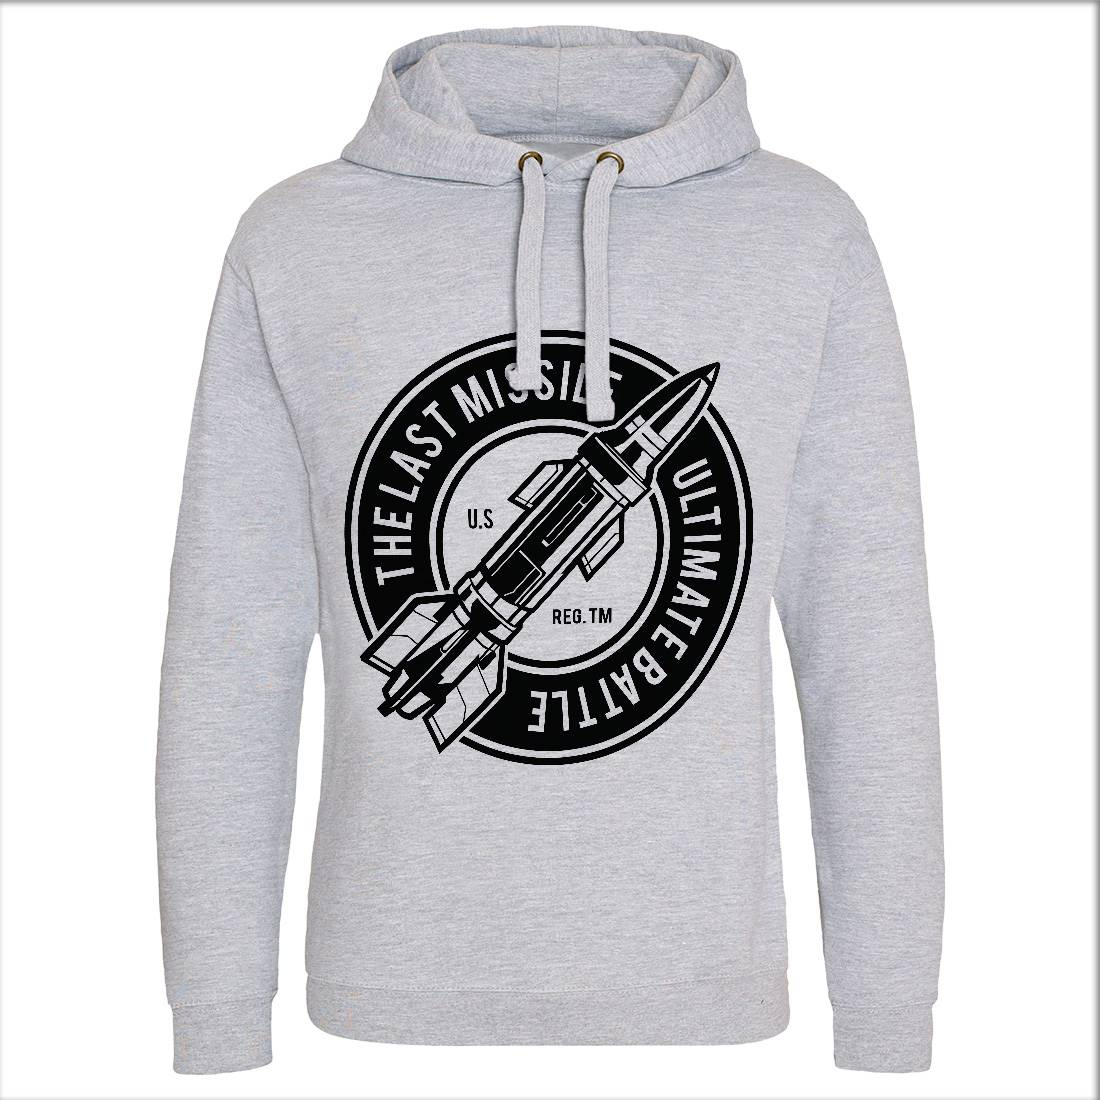 Last Missile Mens Hoodie Without Pocket Army A175